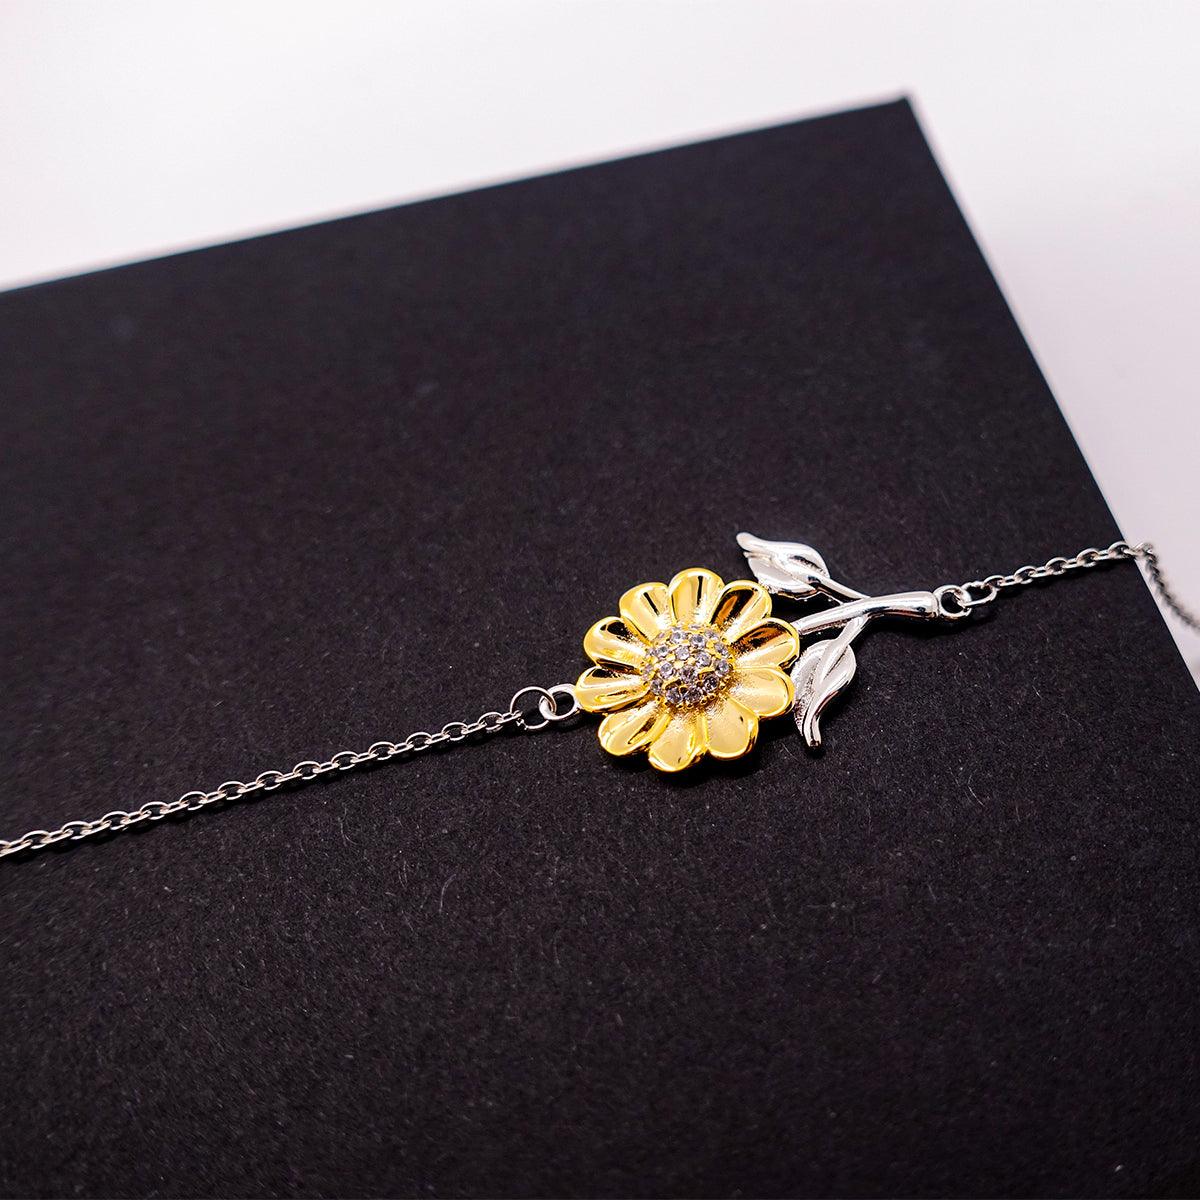 Auditor Sunflower Bracelet - Thanks for being who you are - Birthday Christmas Jewelry Gifts Coworkers Colleague Boss - Mallard Moon Gift Shop